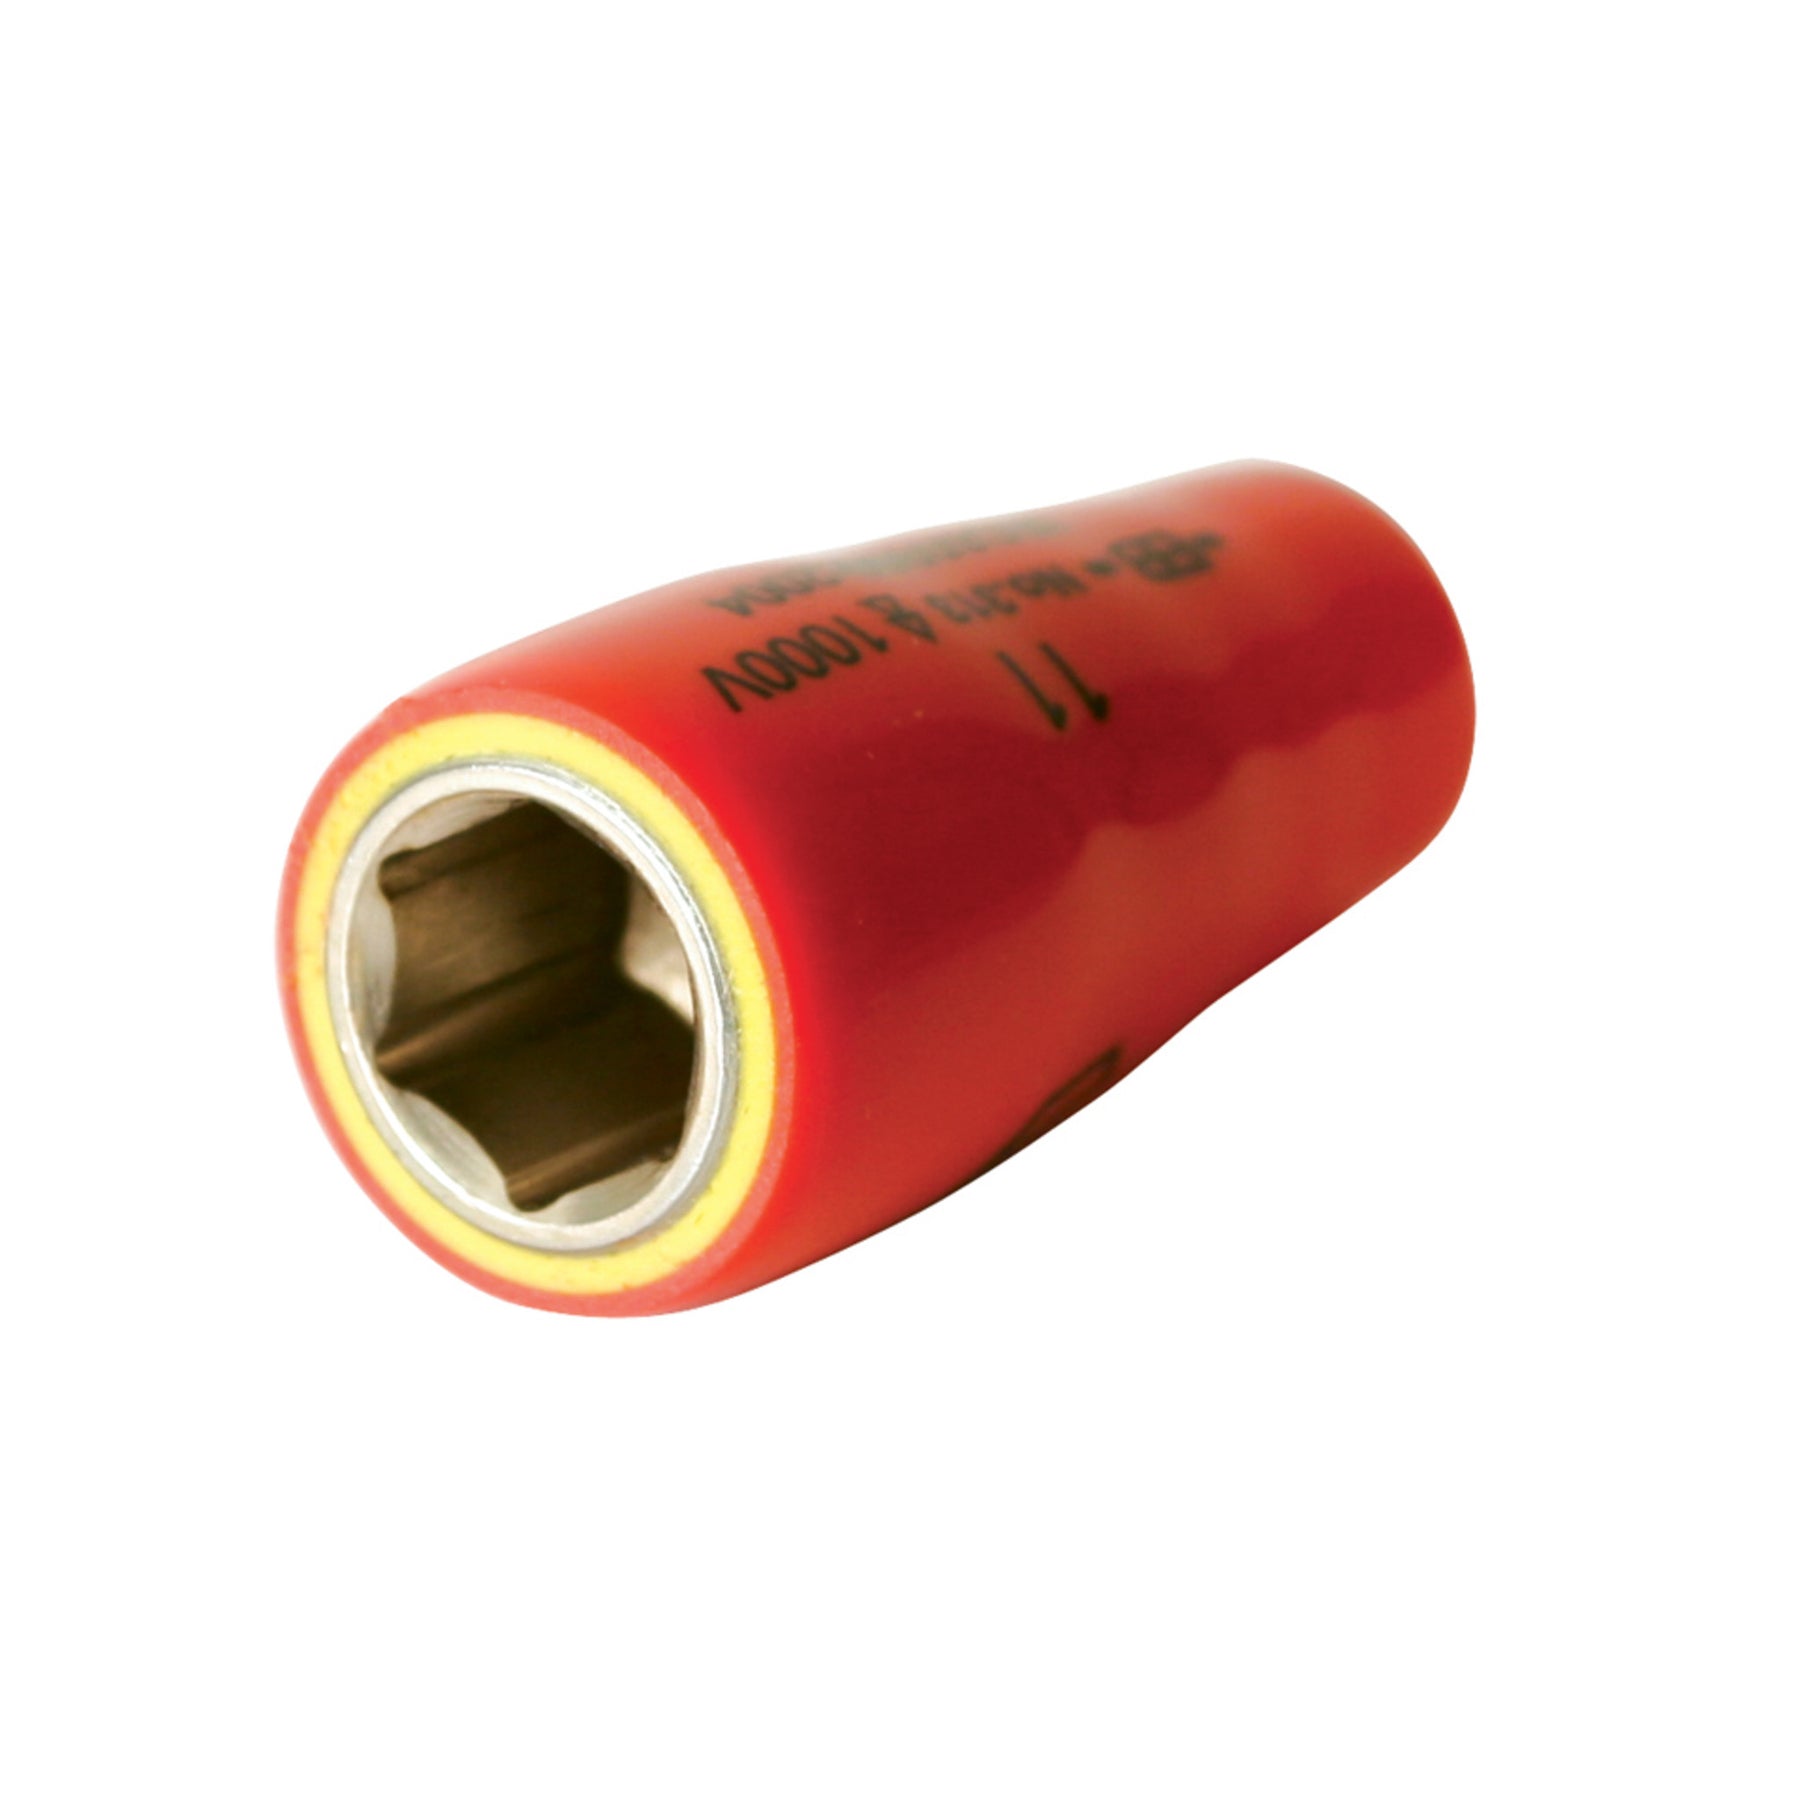 Insulated Socket 1/4" Drive 1/2"